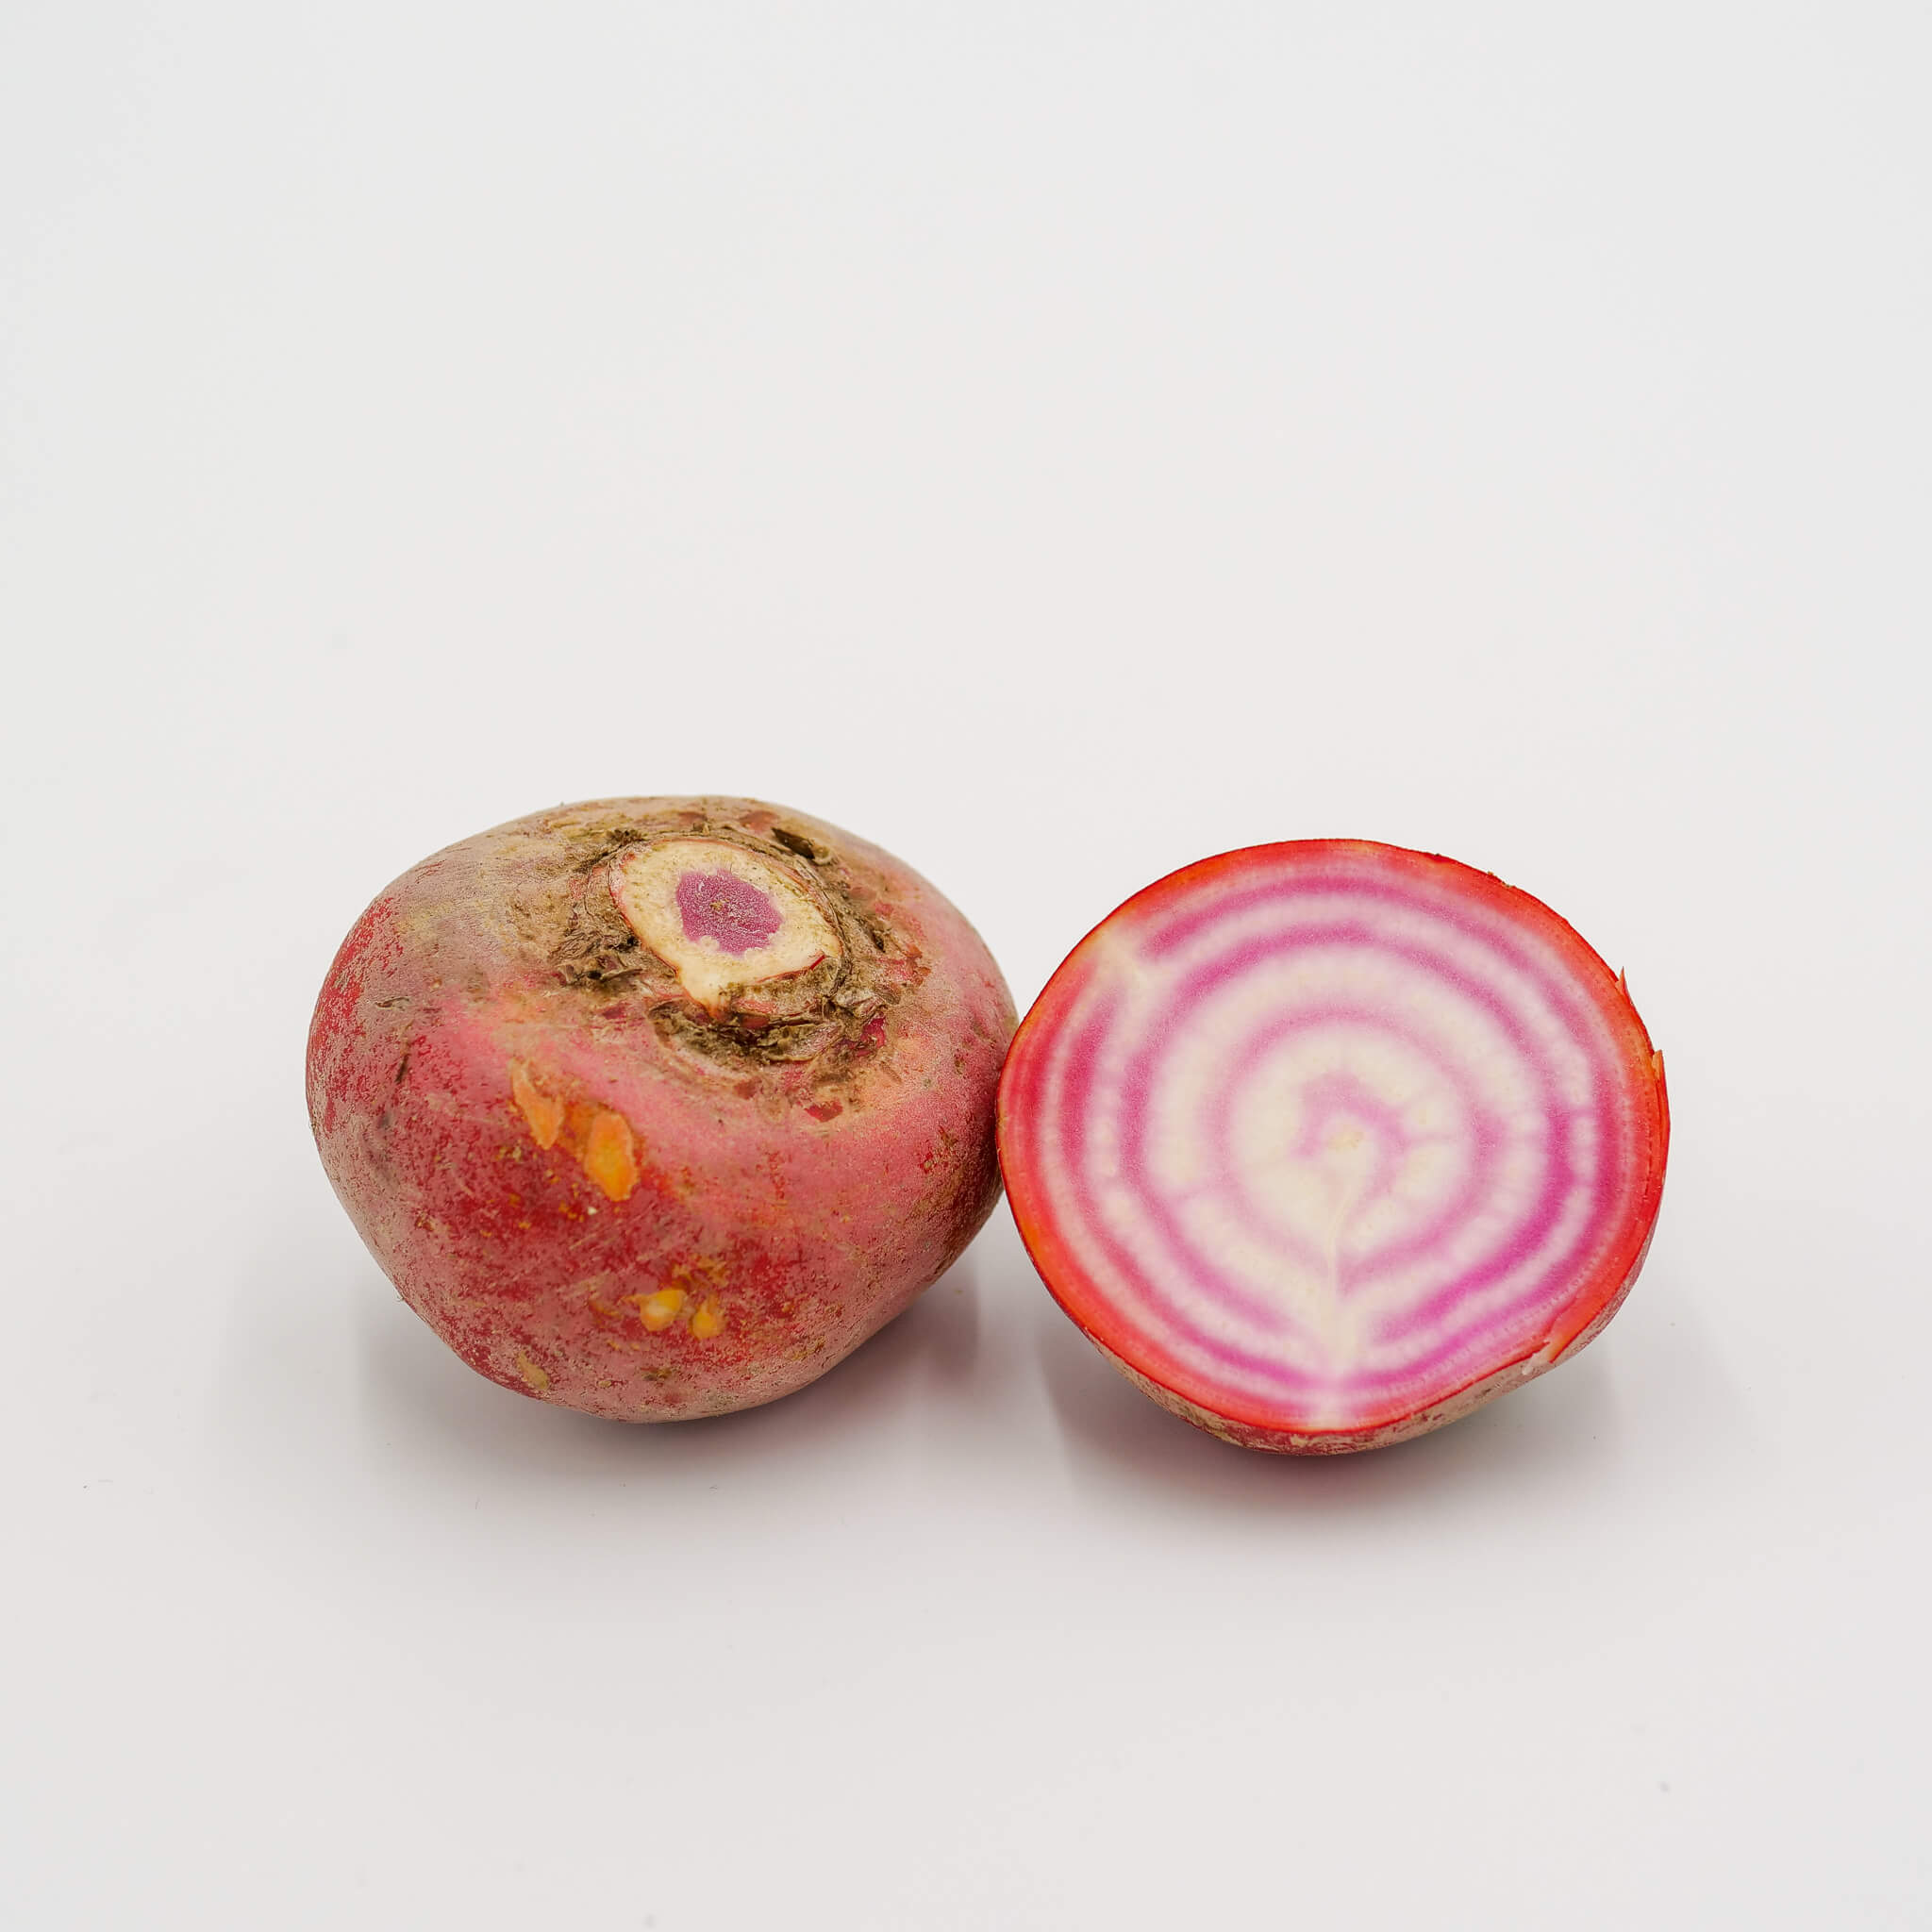 La Légumière, the specialist in Breton and seasonal vegetables! Beetroot-chioggia